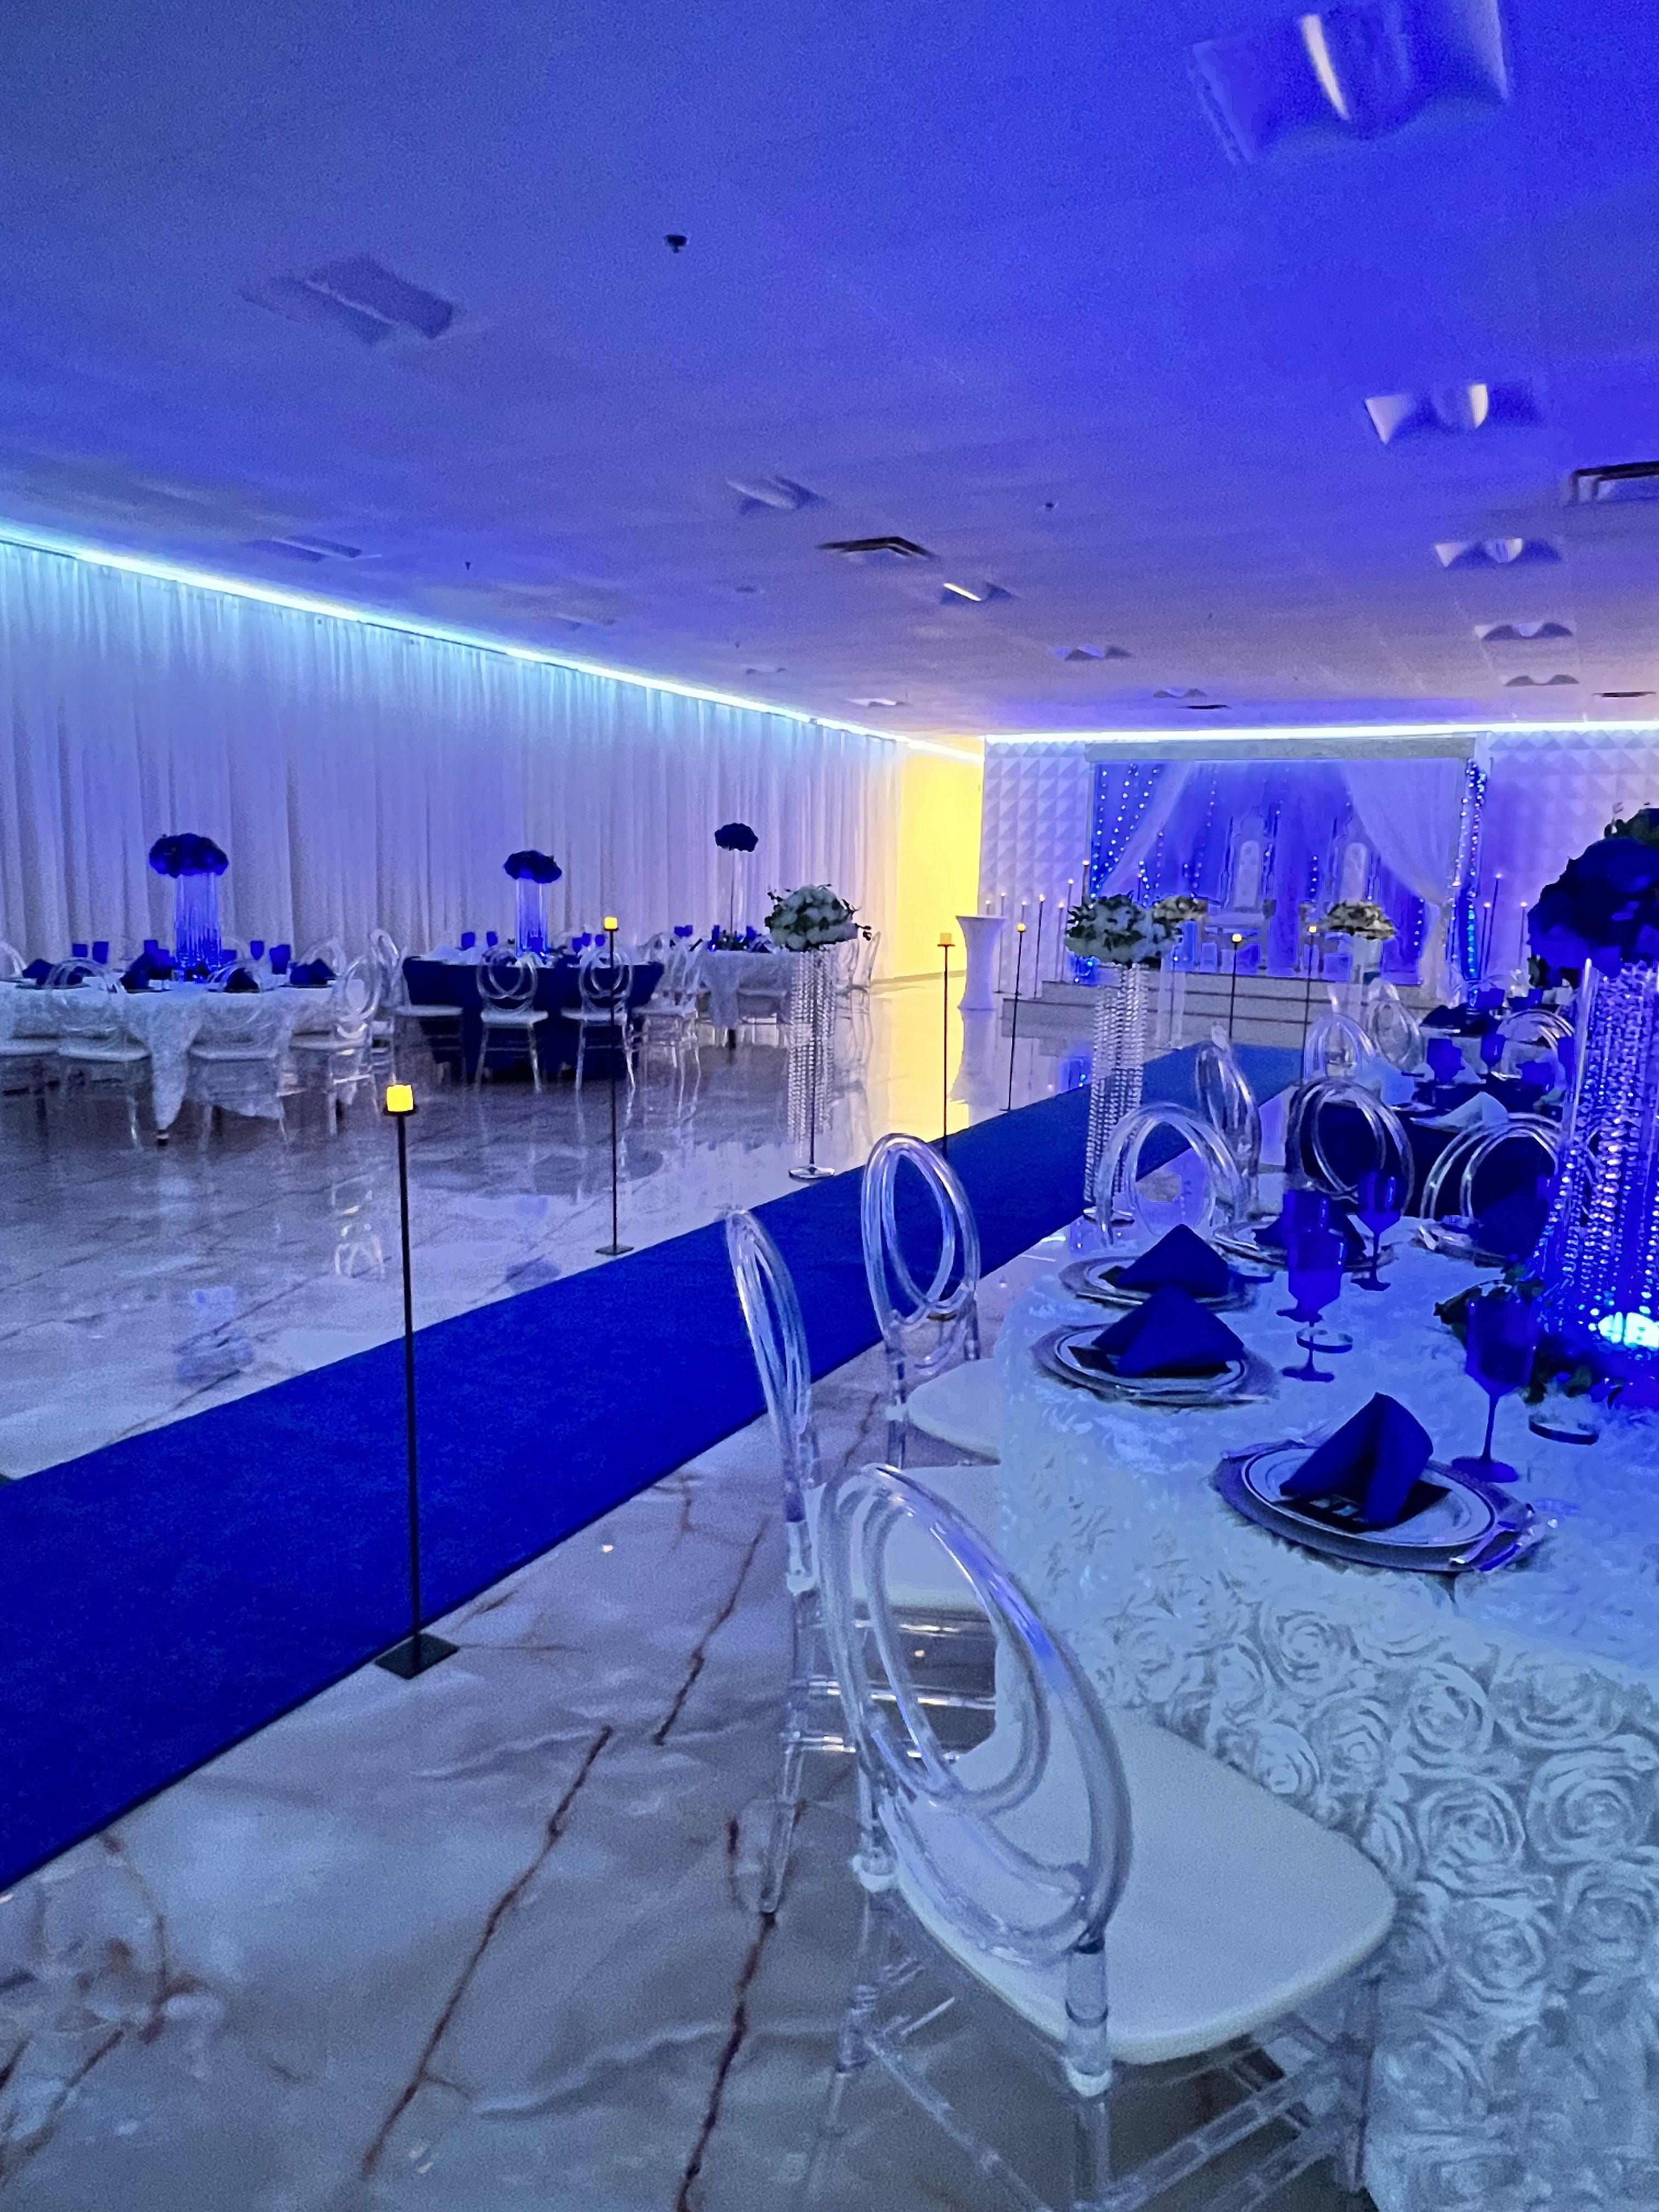 Elegant banquet hall decorated for an event, featuring a blue light ambiance, white and blue table settings on marble floors, and draped ceilings with blue uplighting.